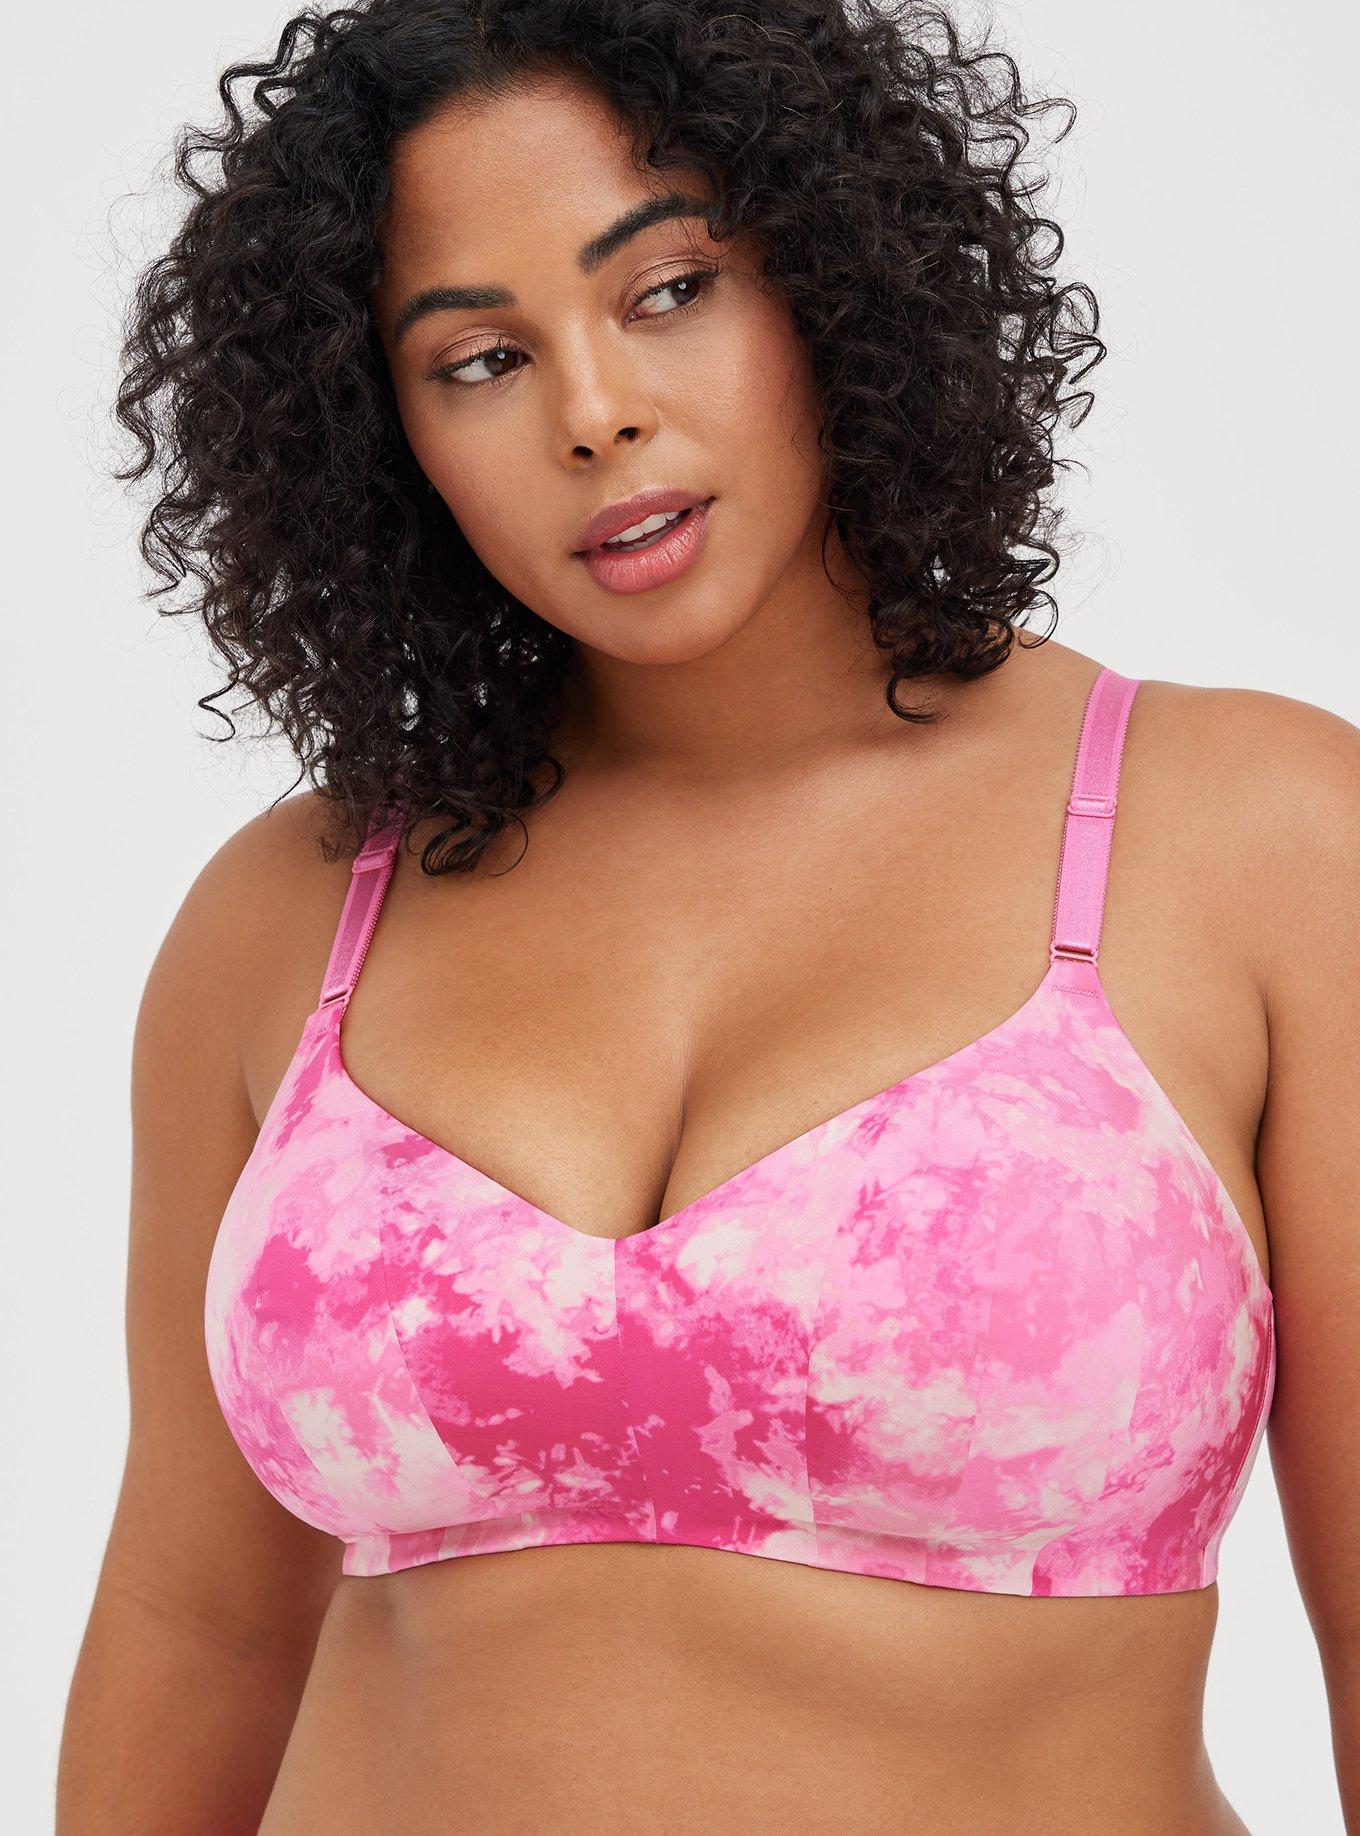 Torrid - A good bra is hard to find. (Unless you shop at Torrid!) Take care  of them!  40% off when you buy 3 or more!